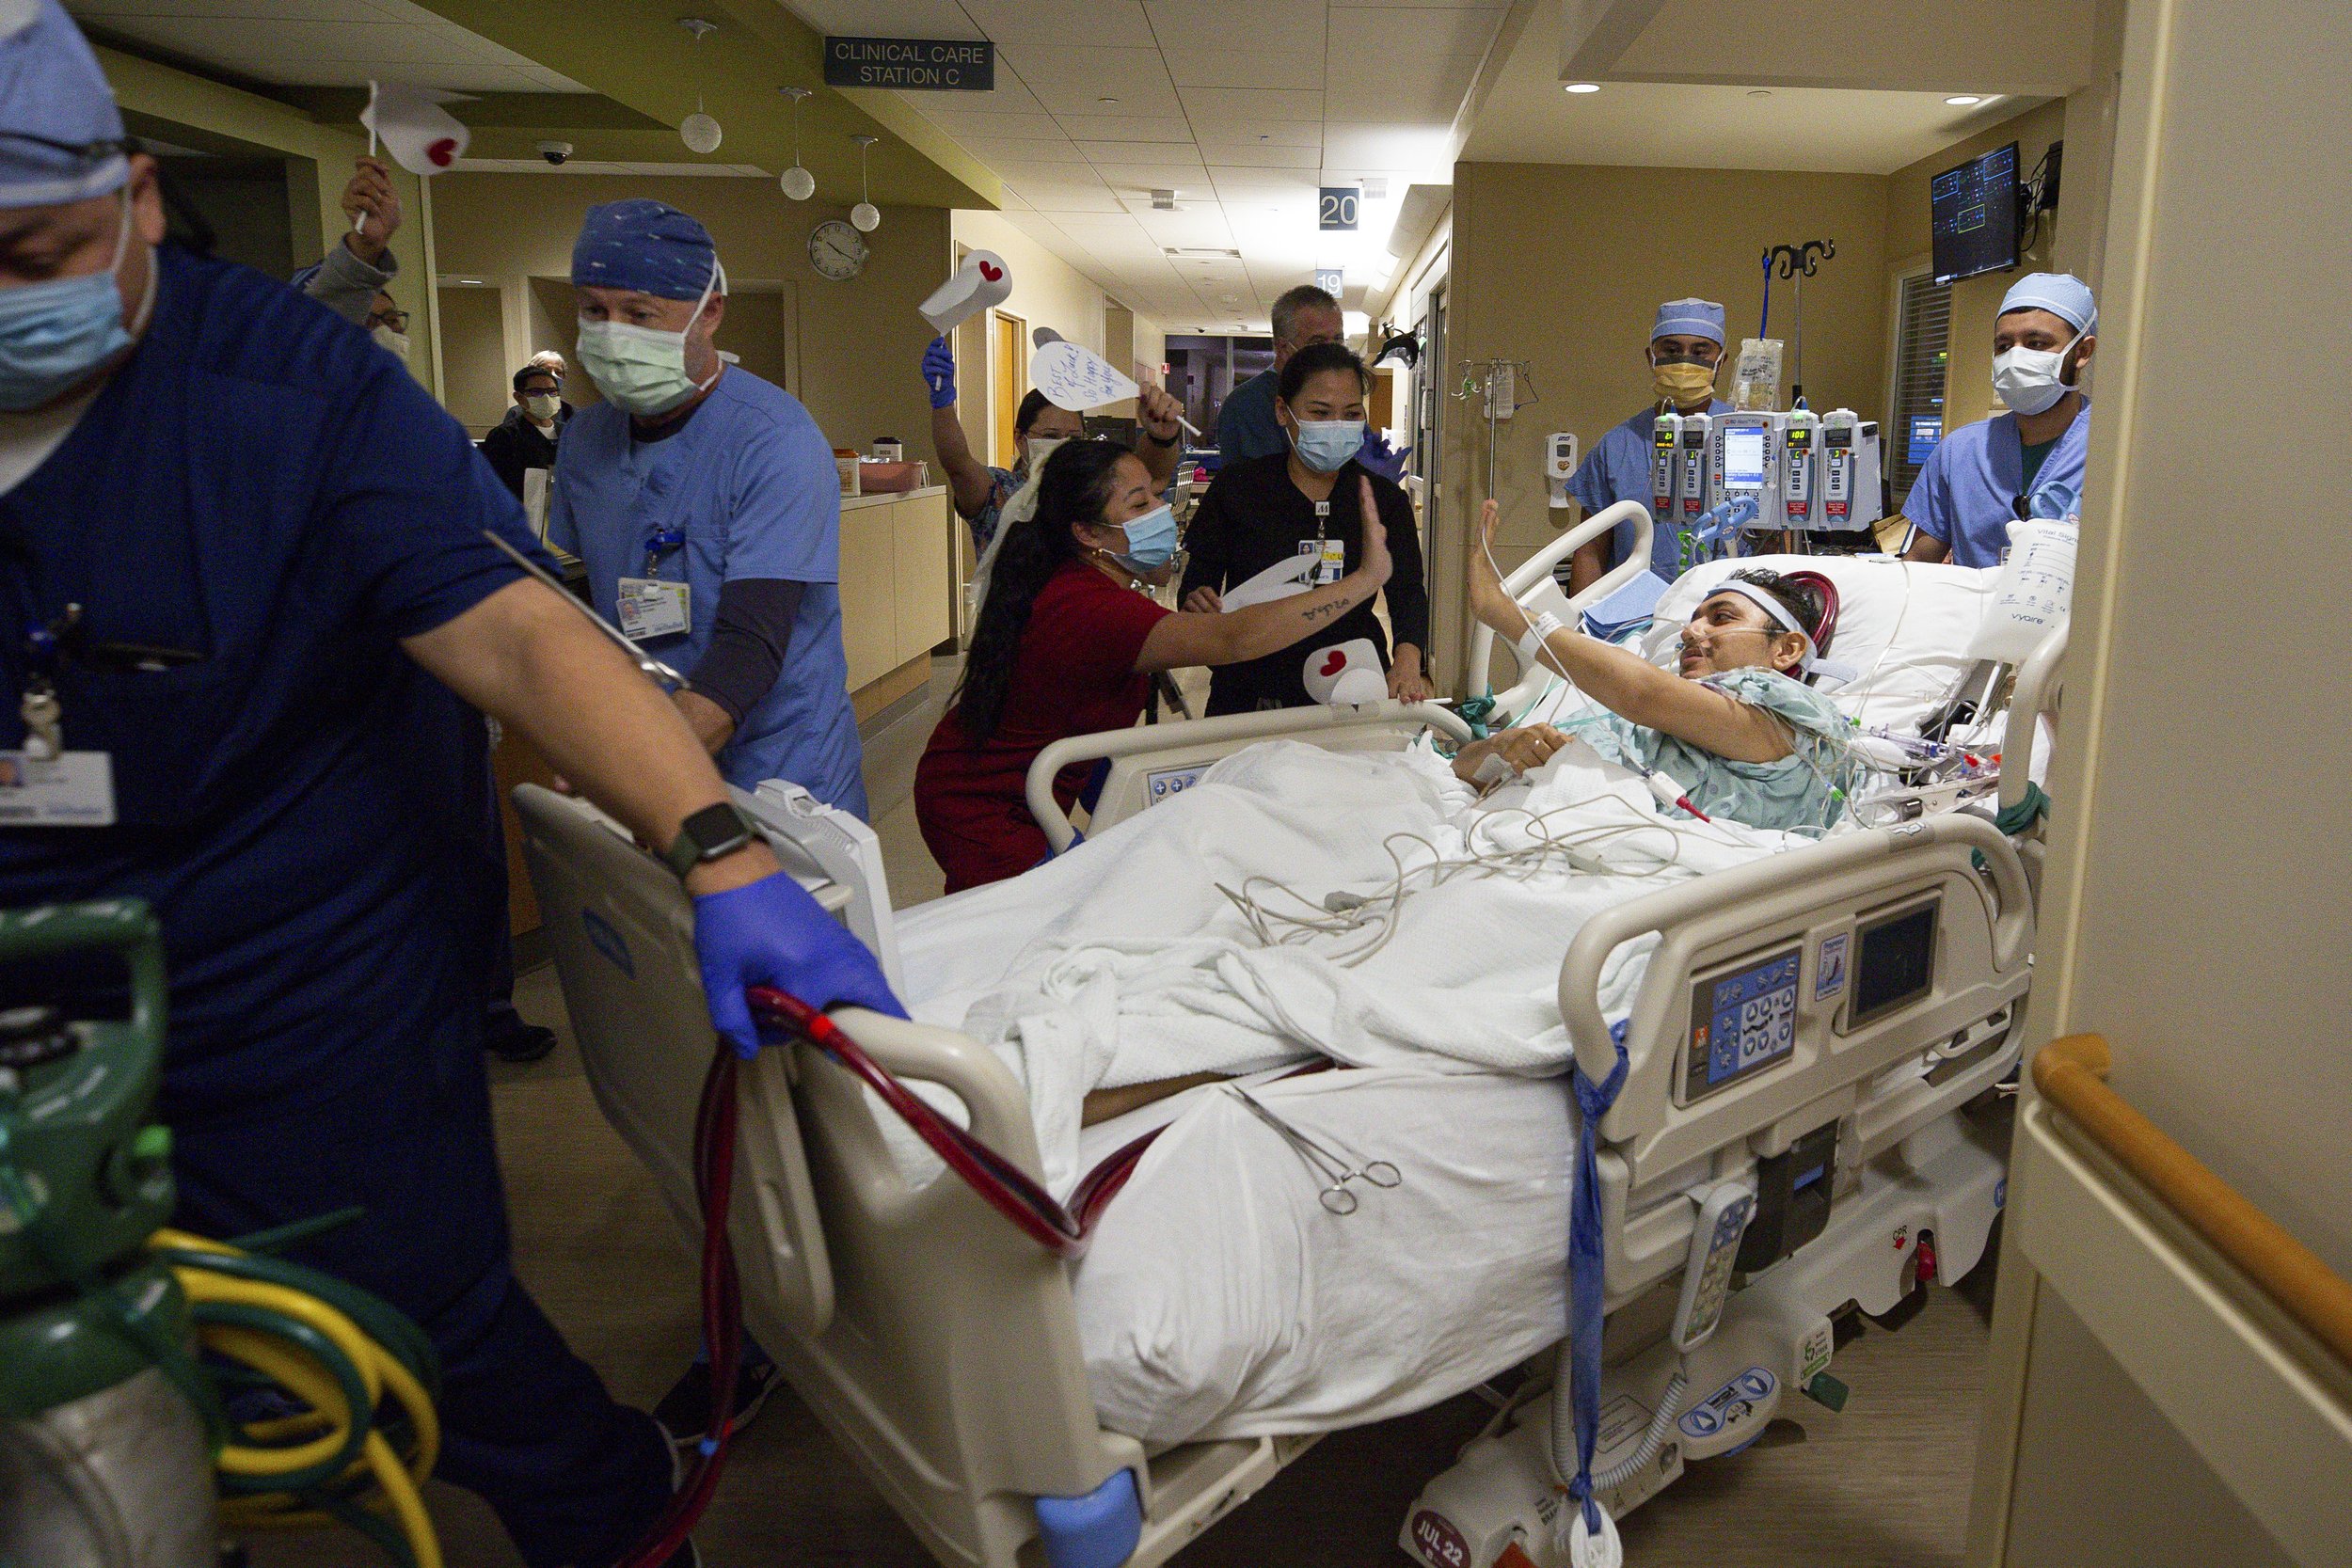  Jesus high-fives nurses as he is wheeled off to the operating room by the surgical team at Houston Methodist Hospital on Friday, Nov. 19, 2021, in Houston, Texas. 